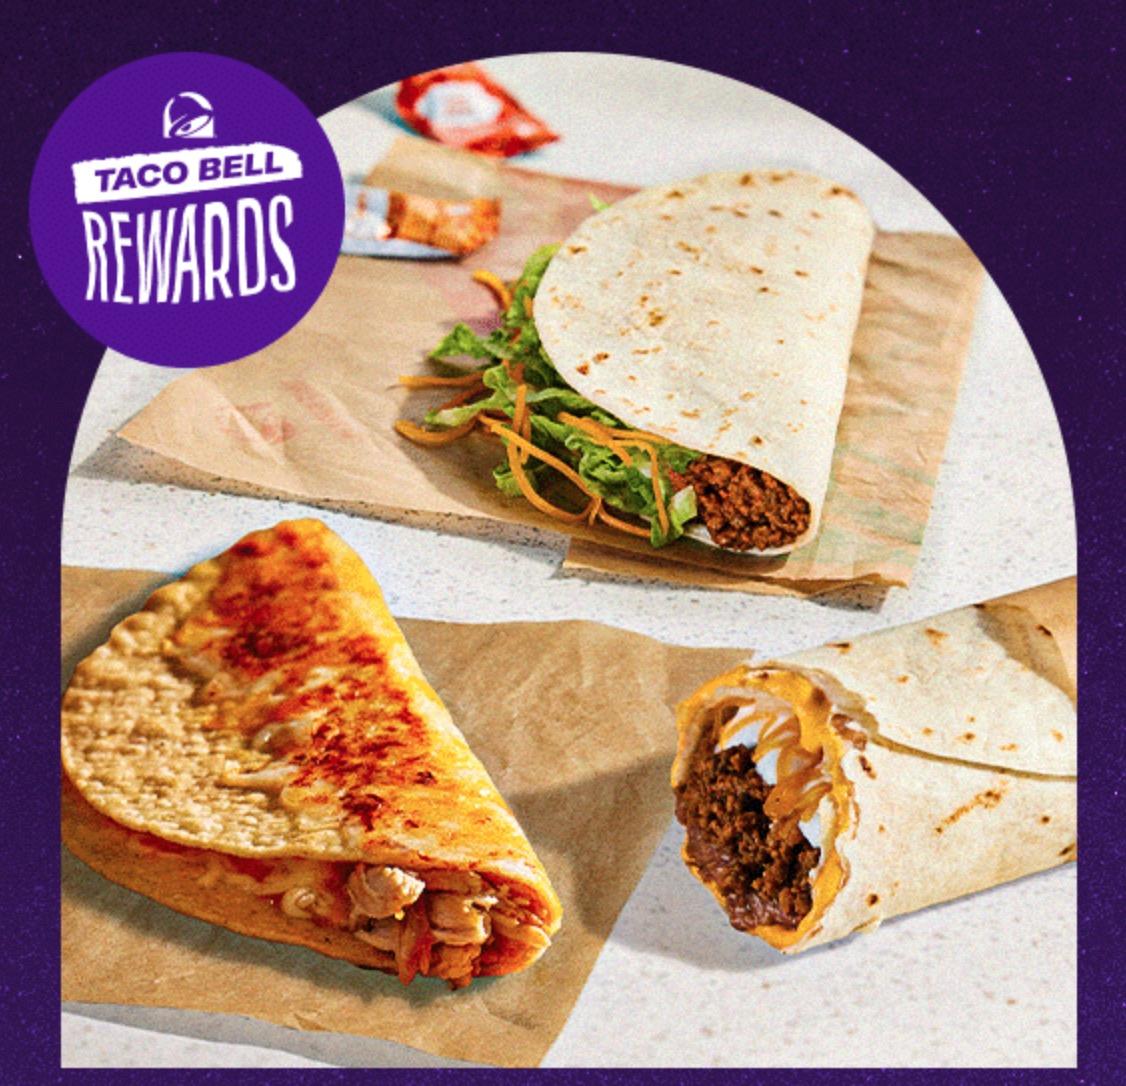 Free Taco Bell Cantina Chicken Crispy Taco or a Beefy Burrito